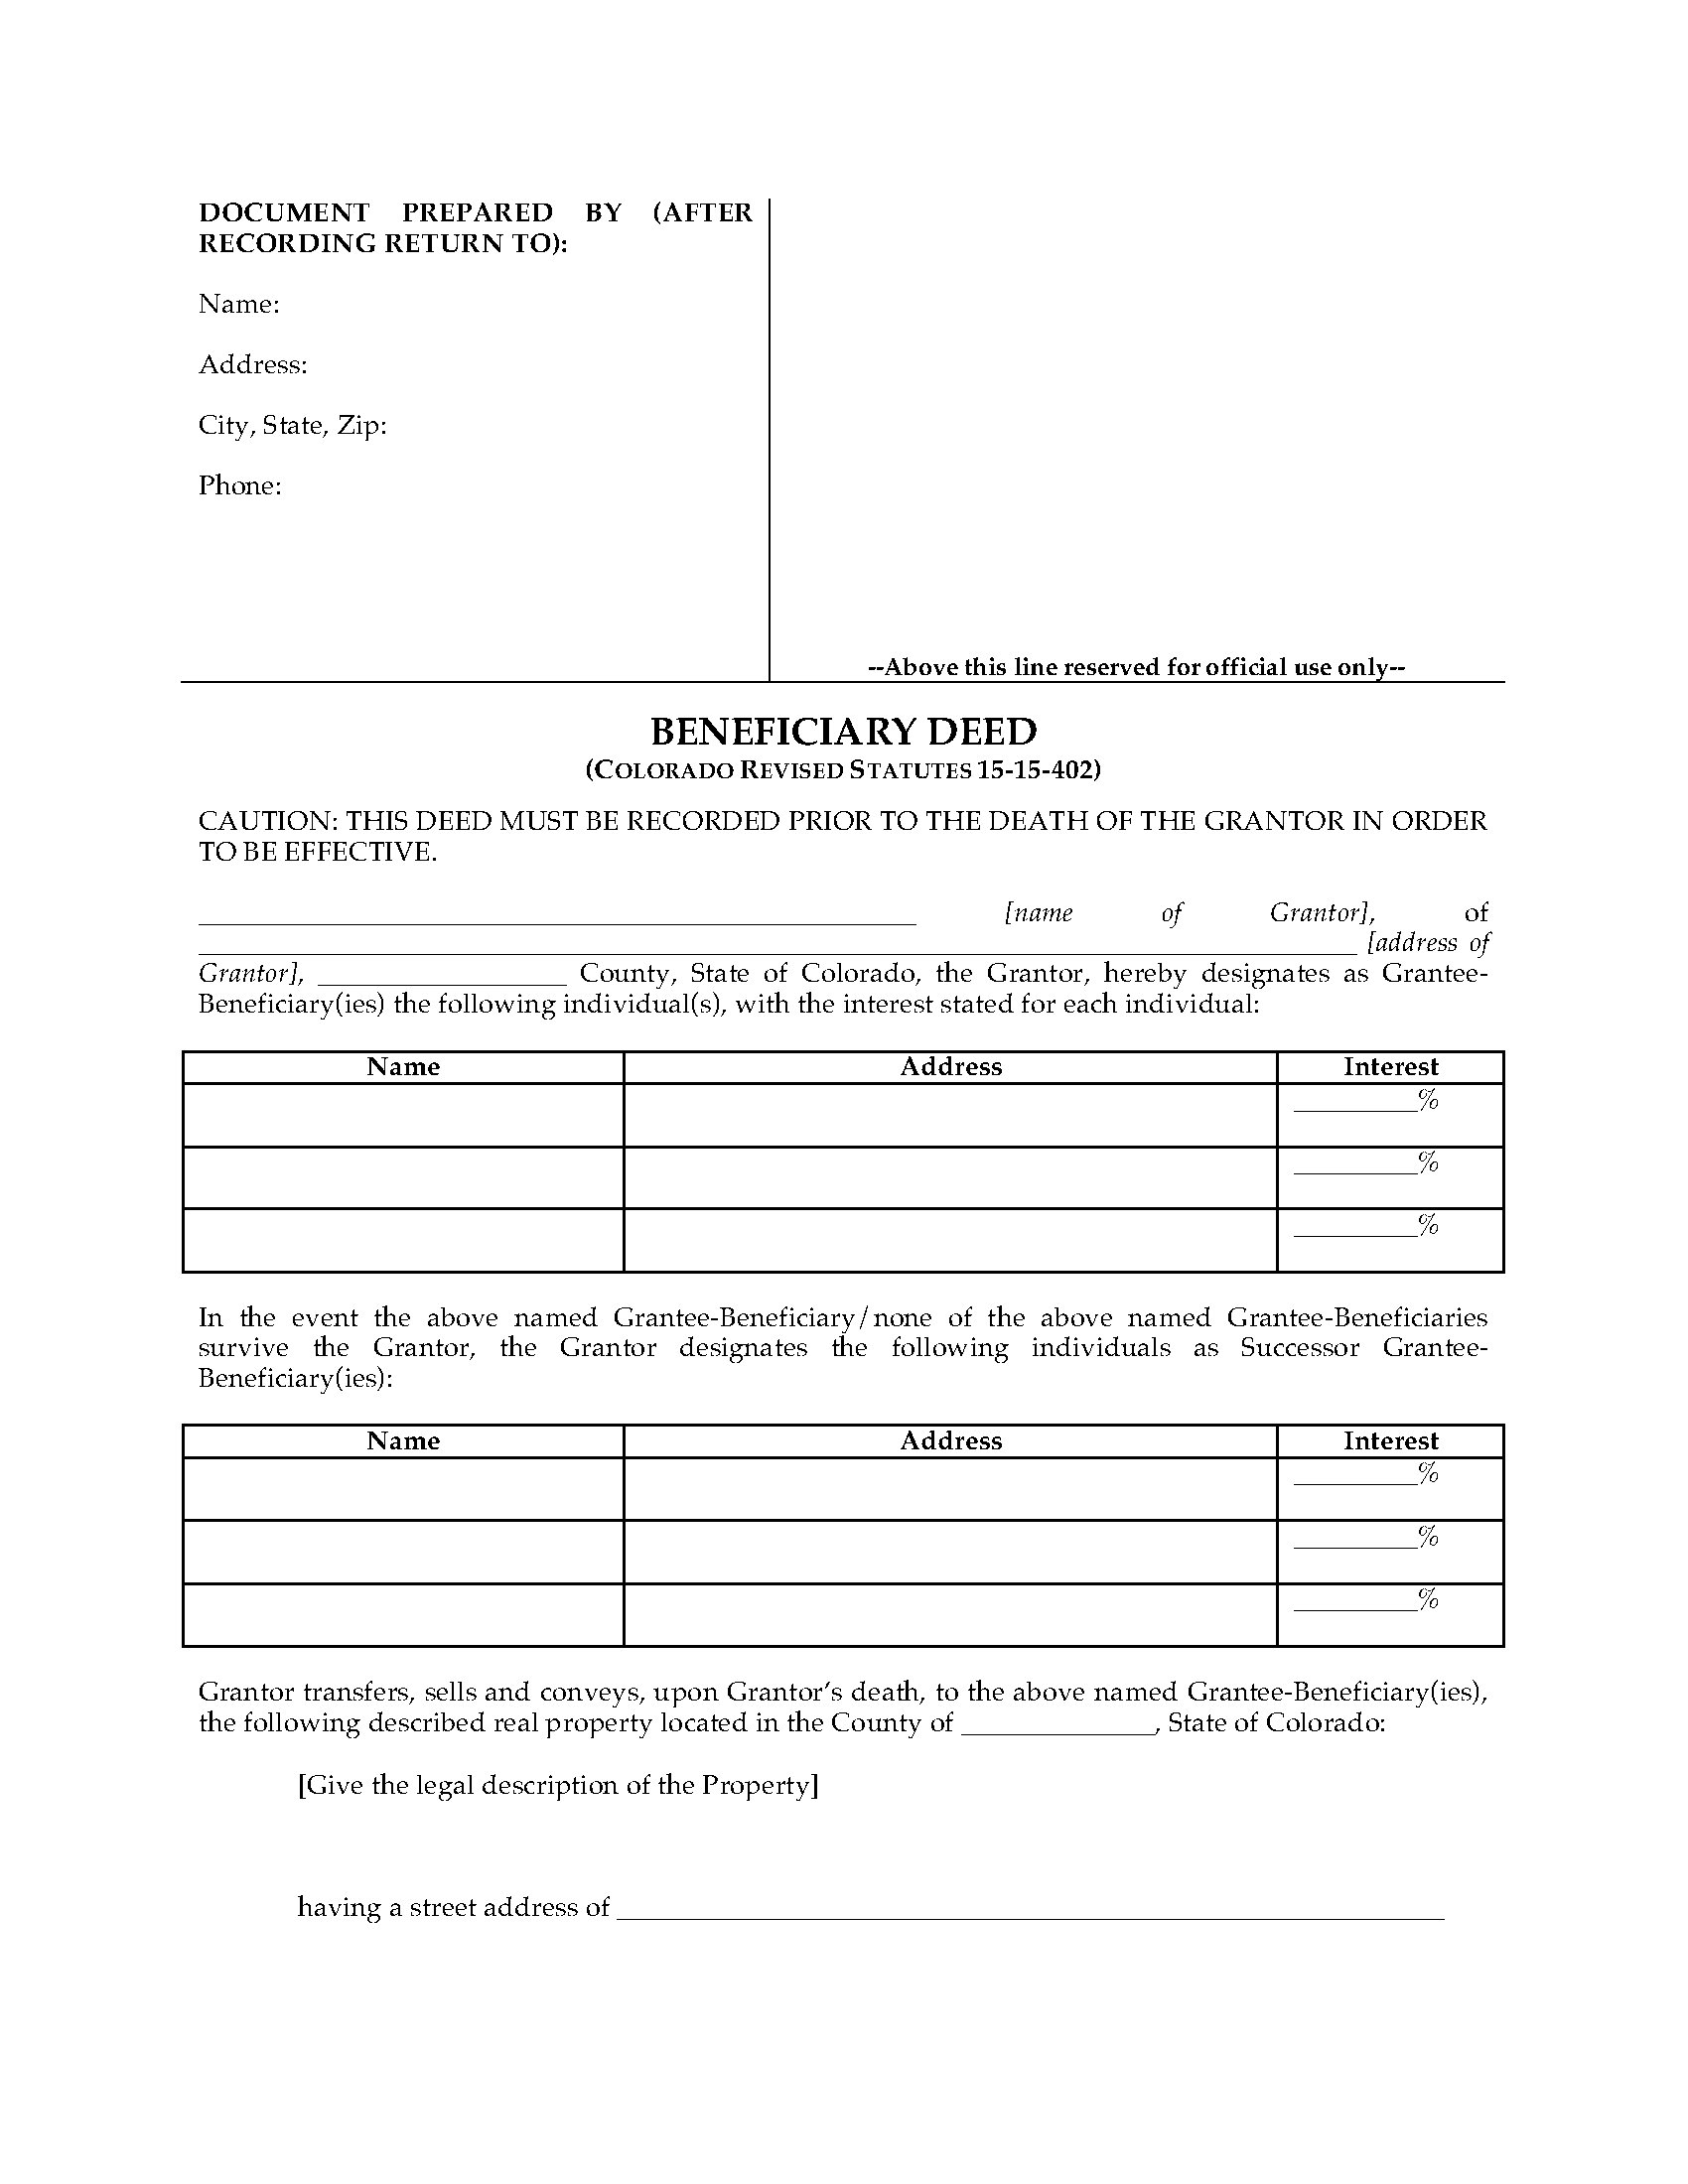 Colorado Beneficiary Deed Forms Legal Forms And Business Templates 